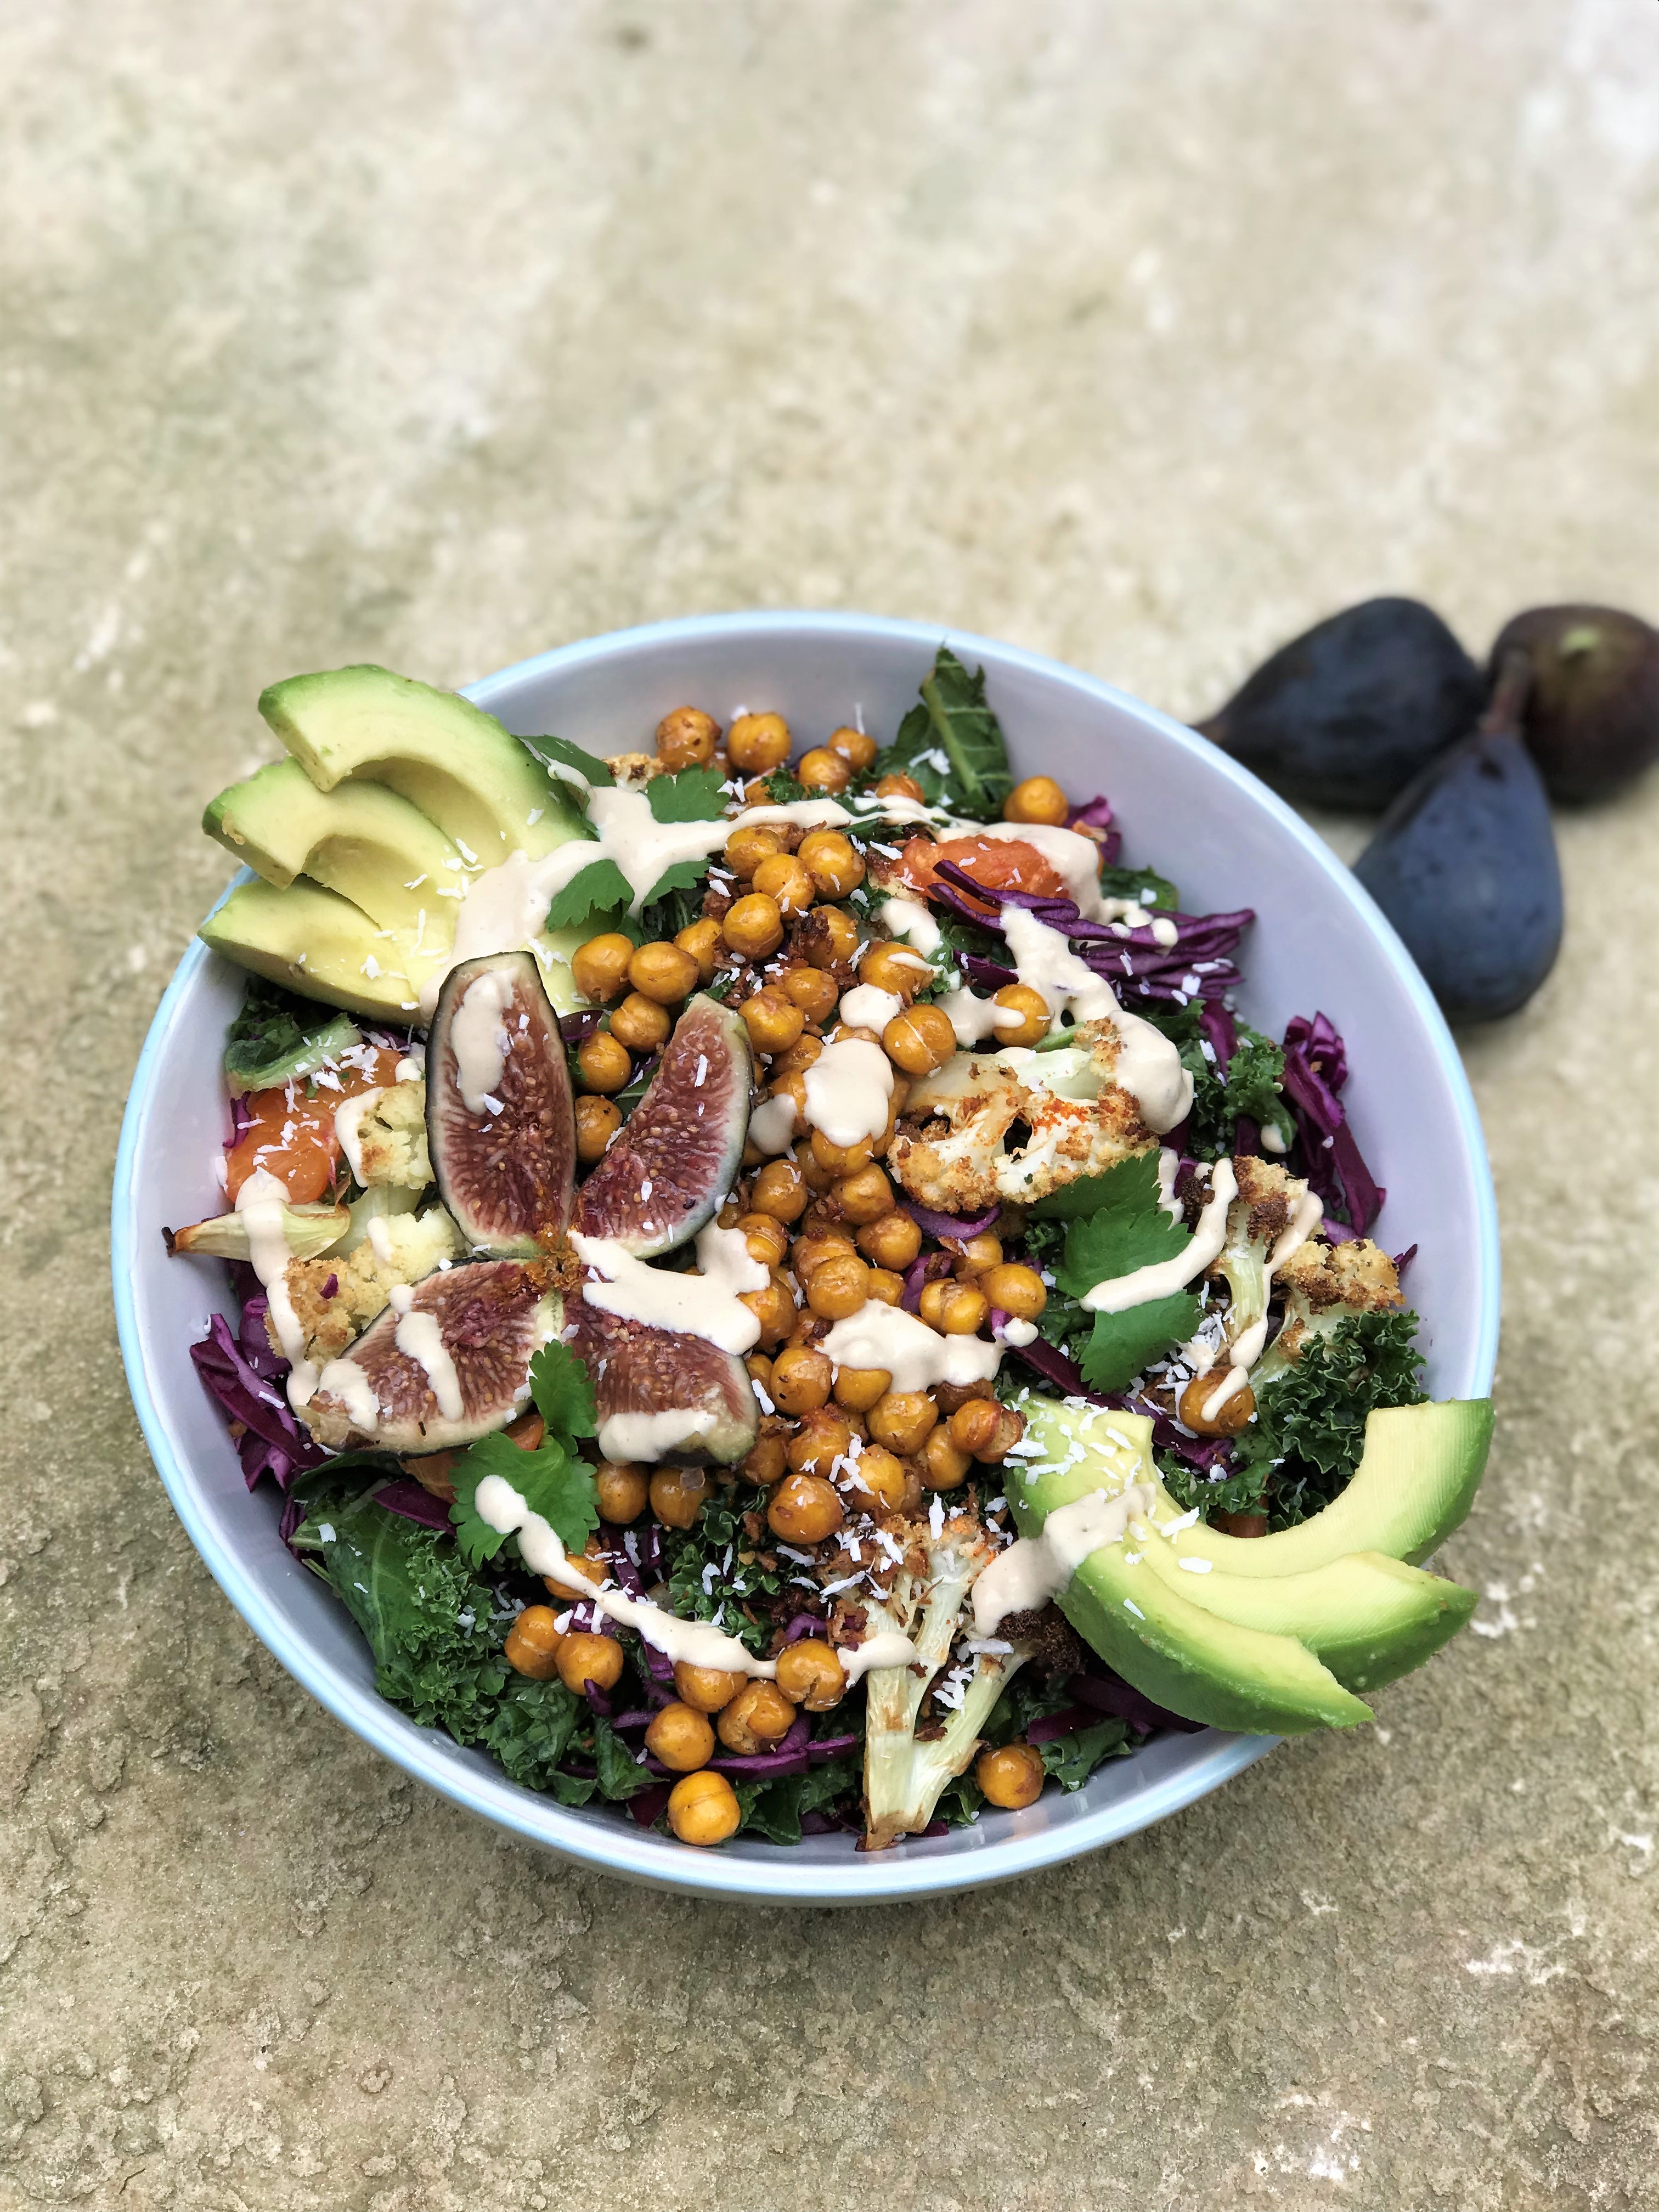 Crunchy Coconut Kale and Chickpea Salad with Figs and Tahini Dressing